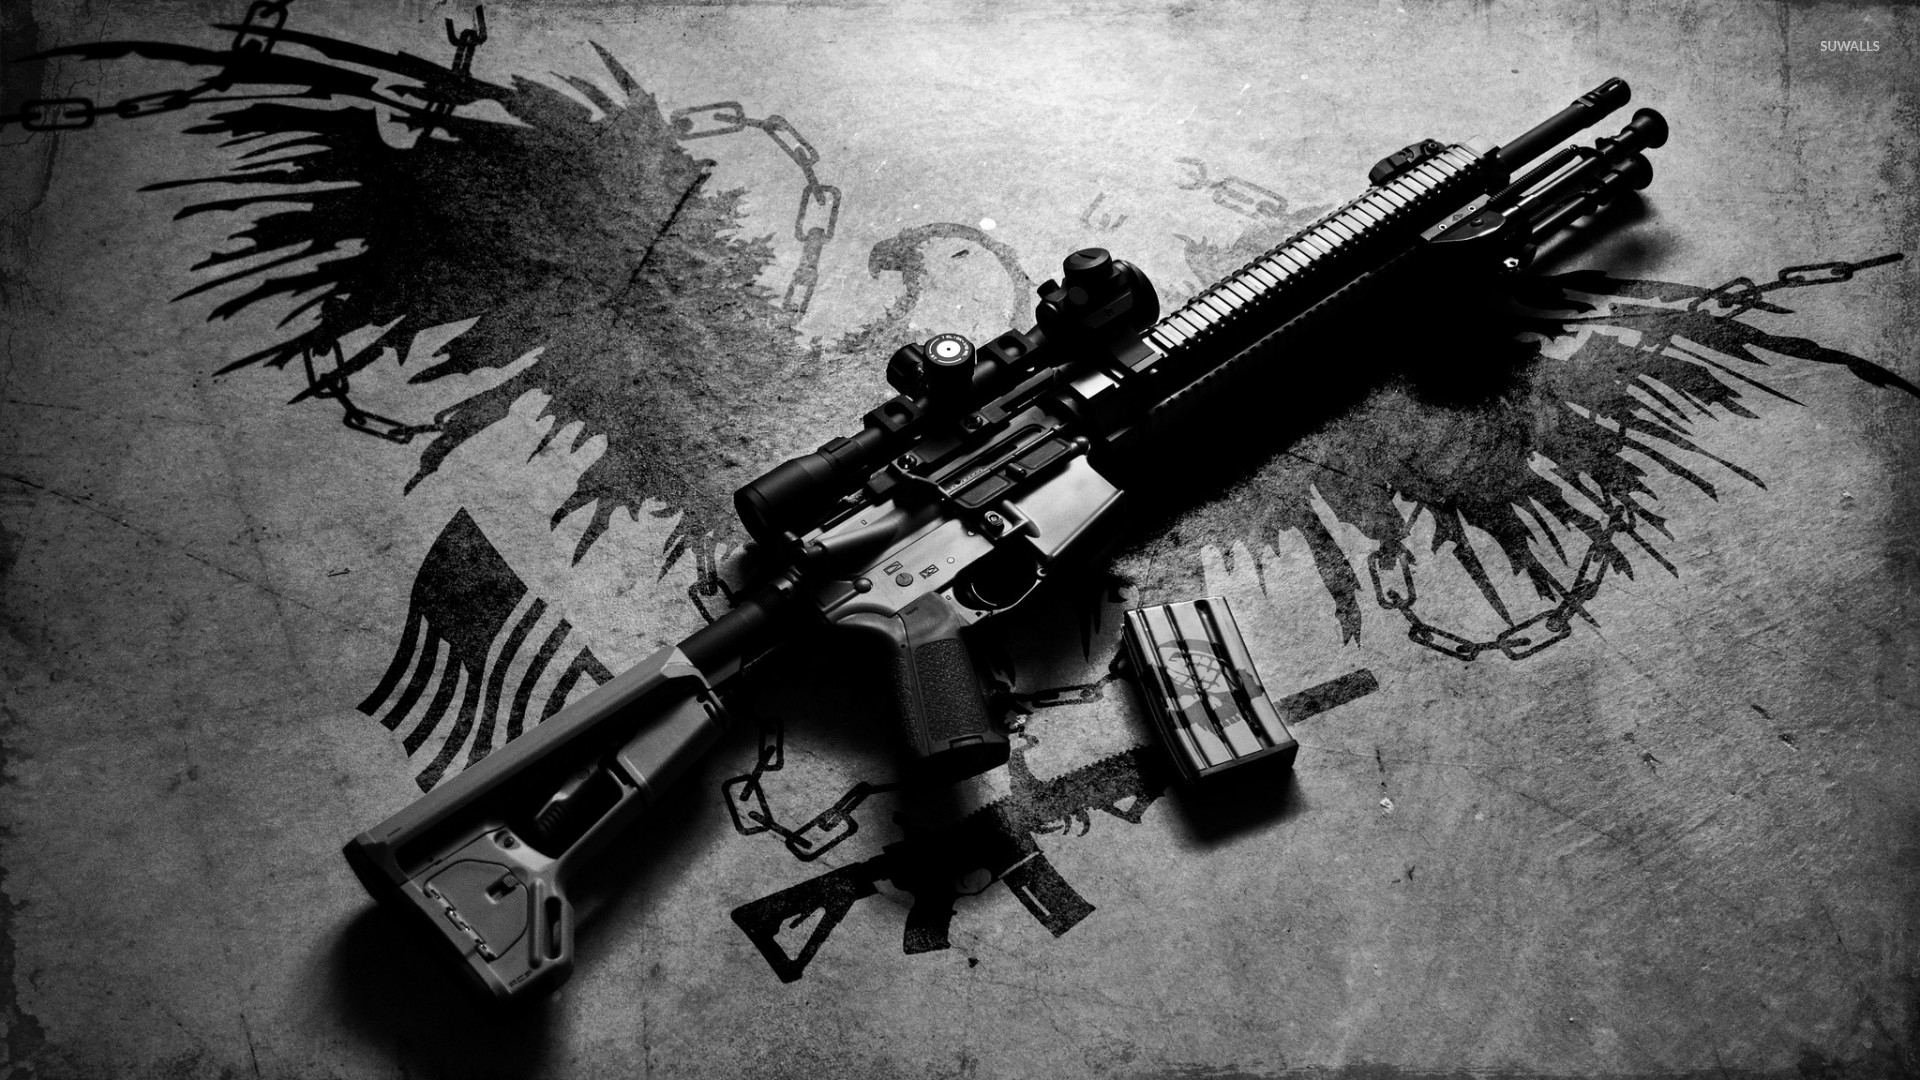 Ar 15 Rifle On The Ground Wallpaper Photography HD Wallpapers Download Free Map Images Wallpaper [wallpaper376.blogspot.com]